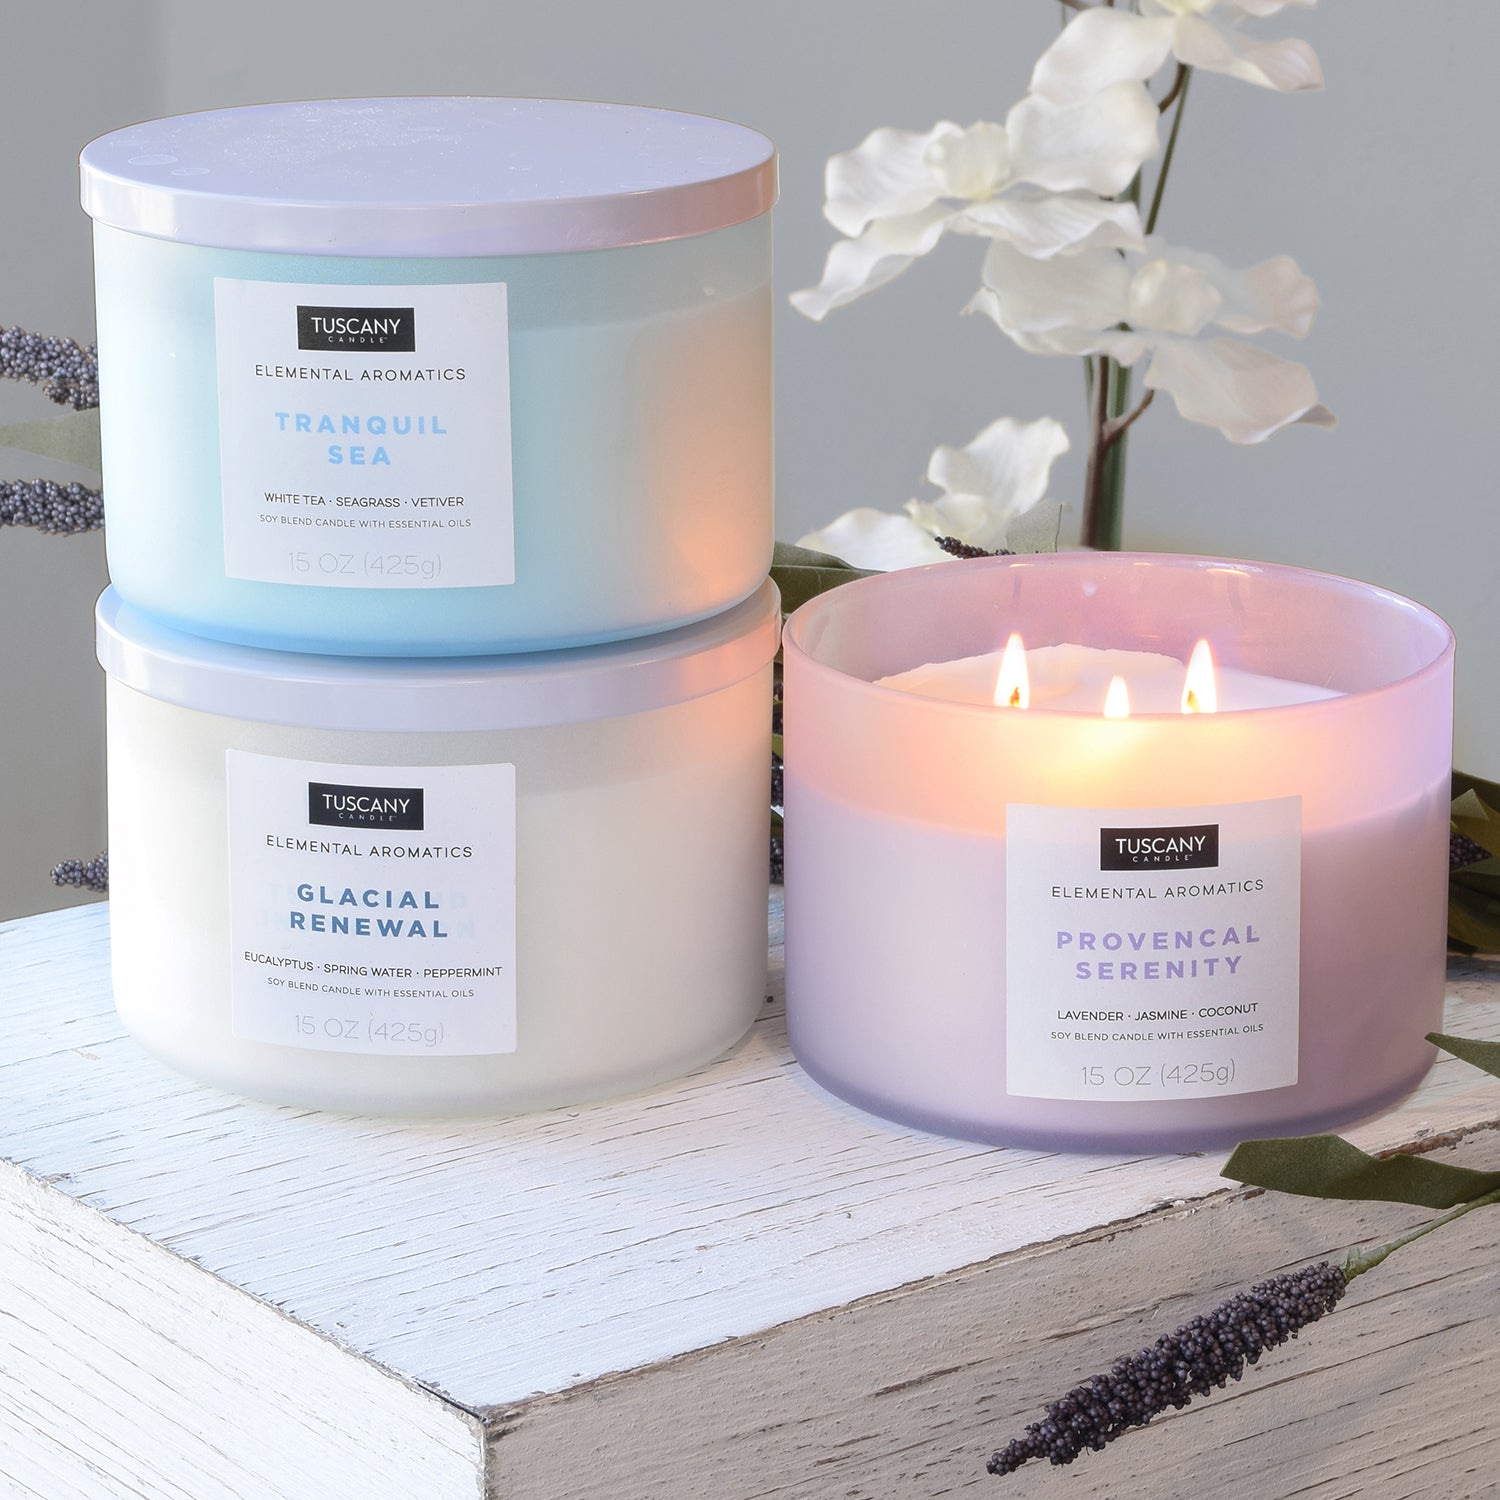 Three Tuscany Candle Glacial Renewal Scented Jar Candles (15 oz) – Elemental Aromatics Collection on a table, emitting a refreshing lavender scent.